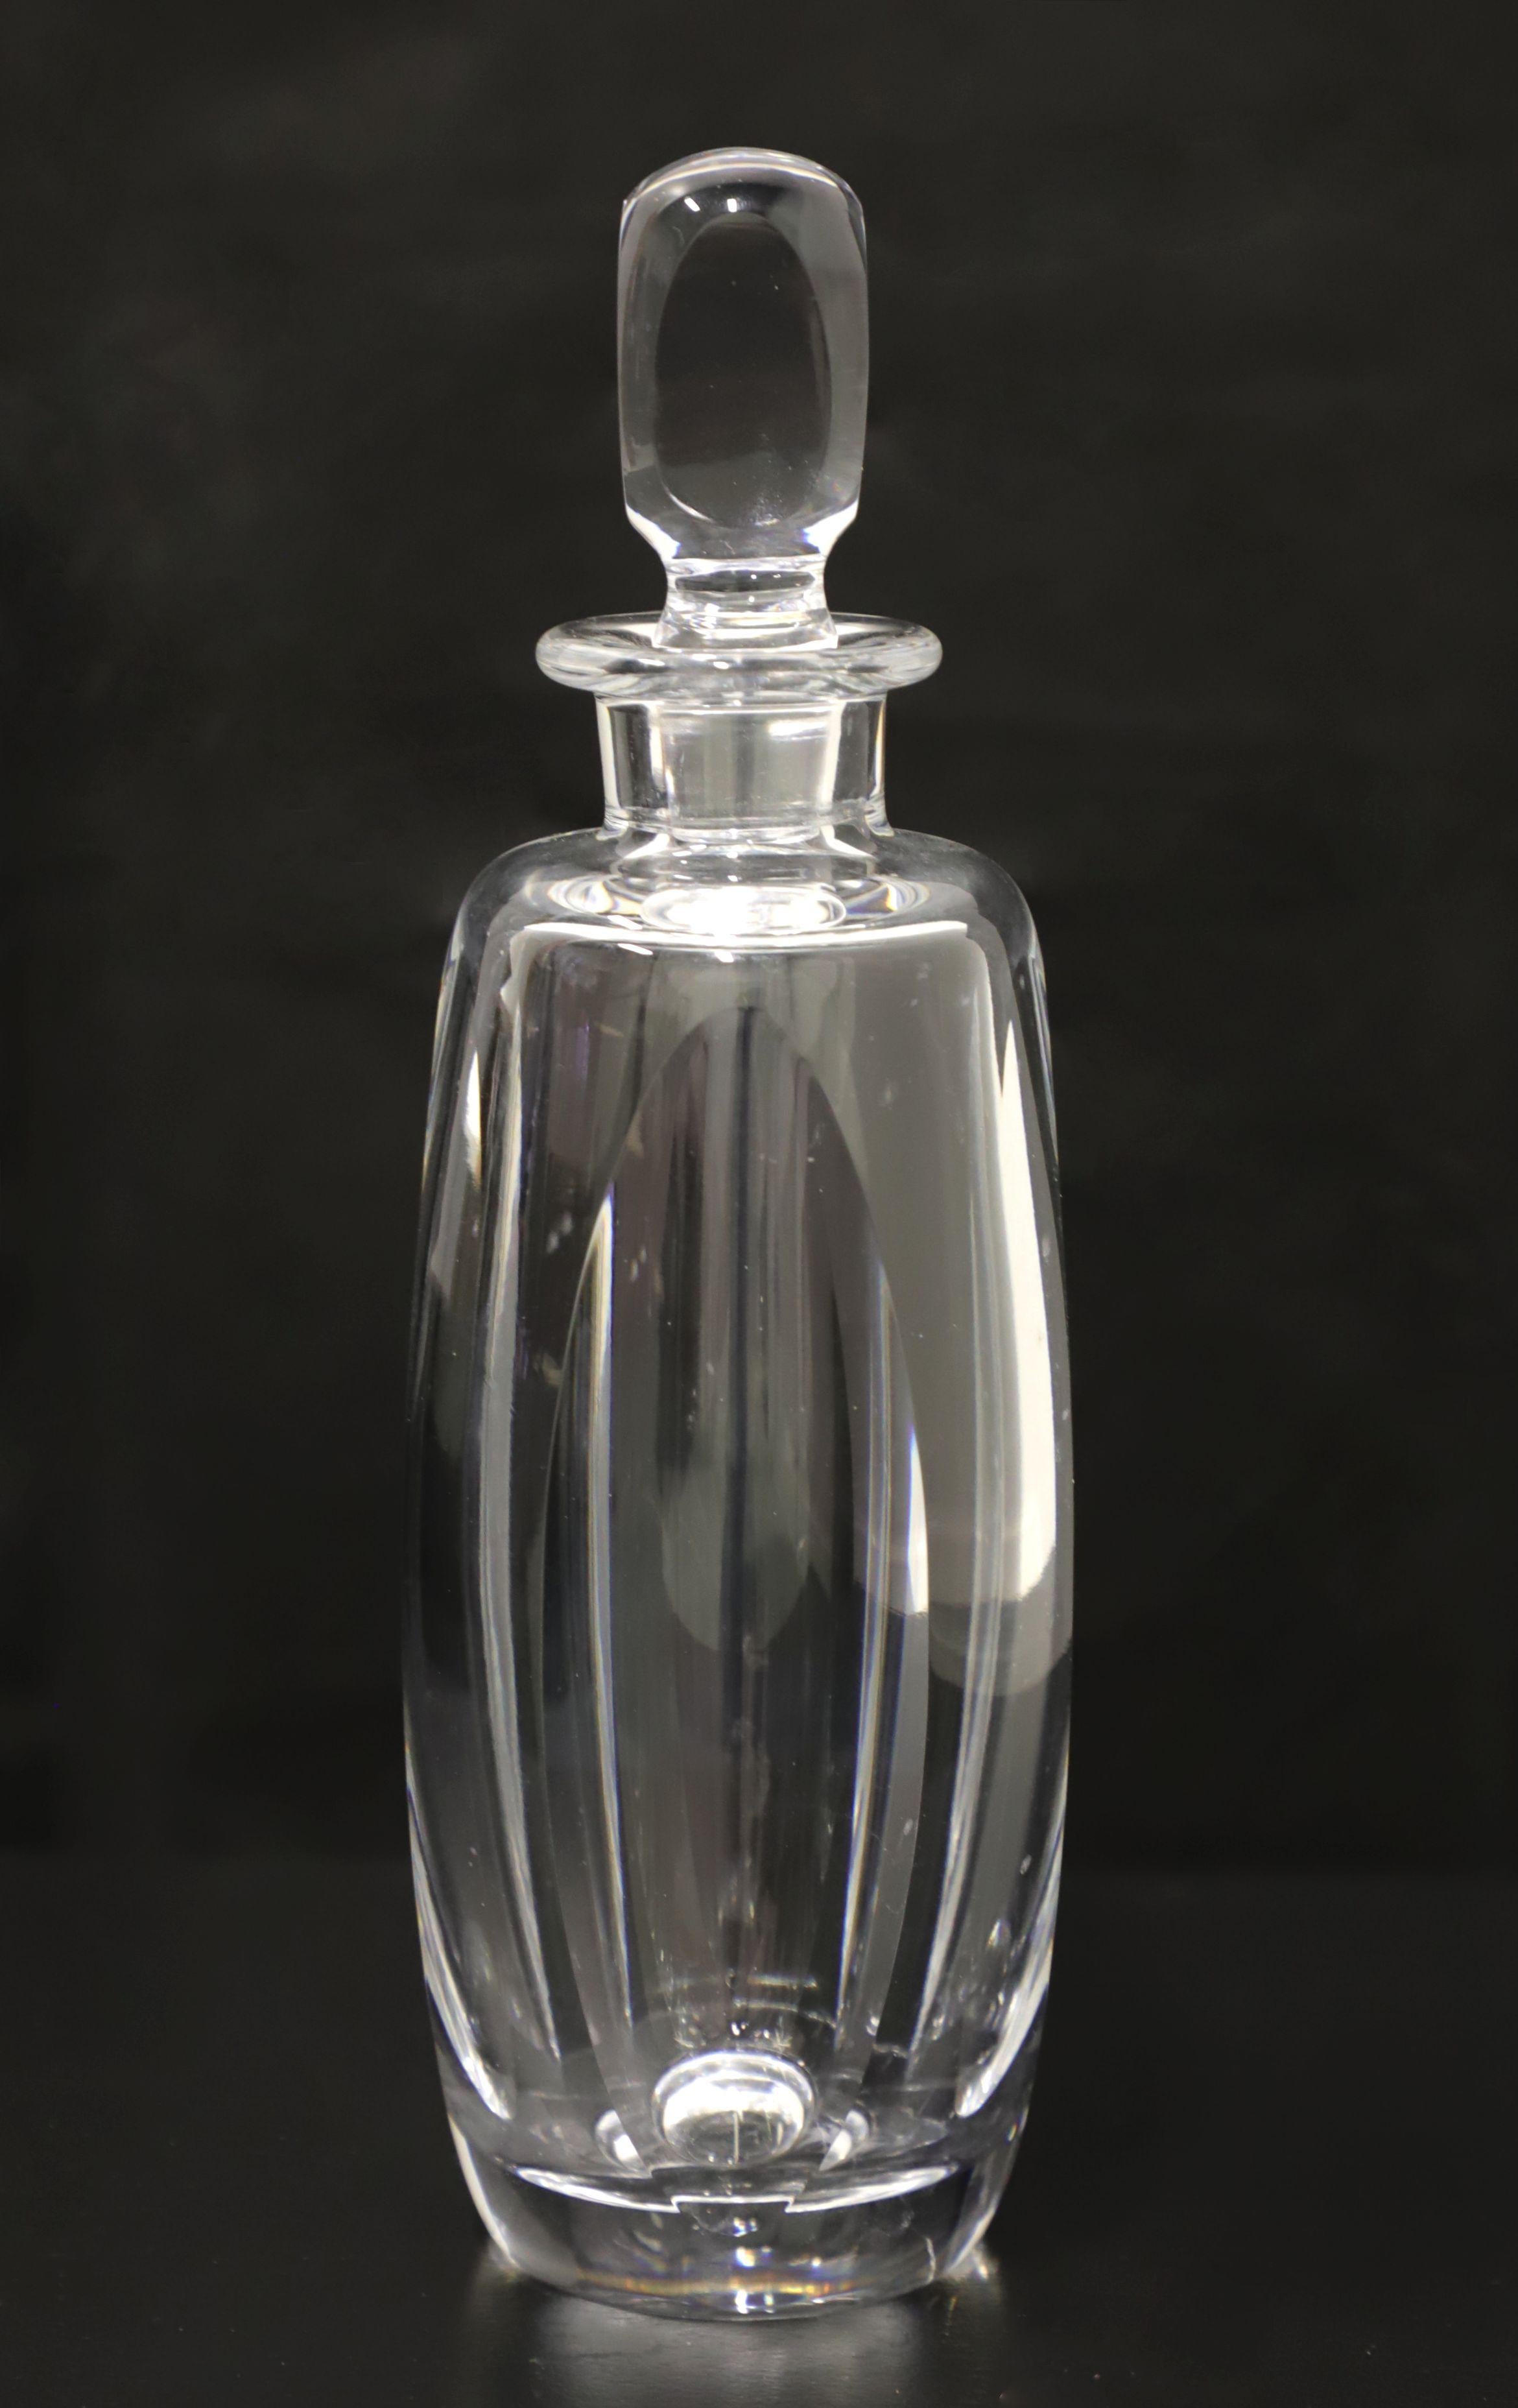 A Mid 20th Century crystal decanter. Clear crystal decanter with cylindrical shape and subtle swirl pattern. Clear cylindrical shaped stopper. Origin unknown, most likely the USA.

Measures: 3.5W 3.5D 11.5H, weighs approximately: 5